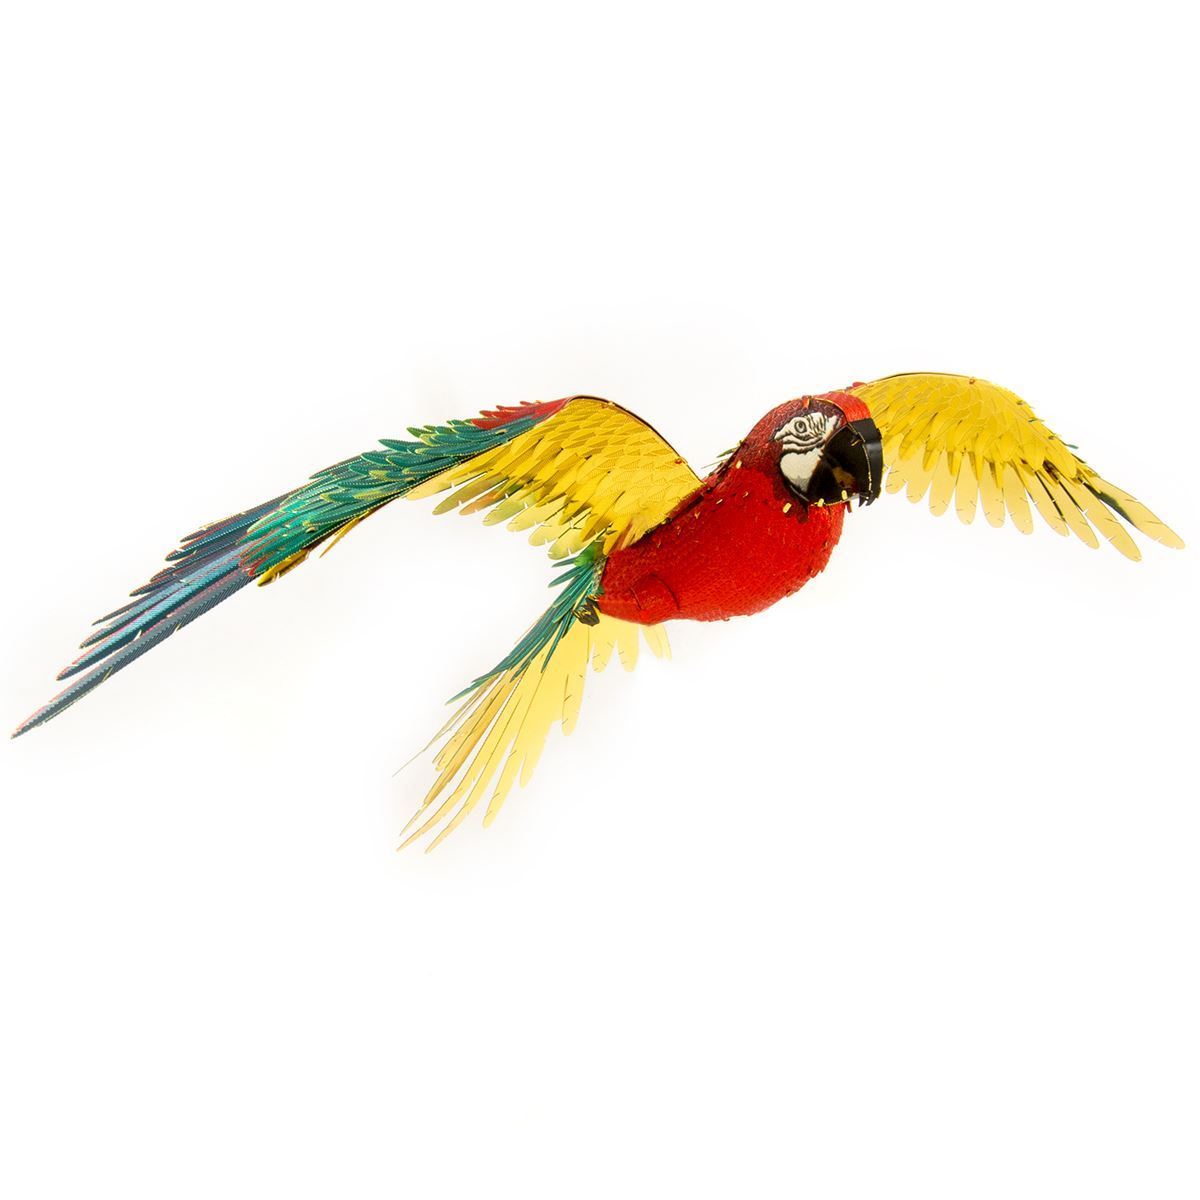 METAL EARTH ICONX Parrot